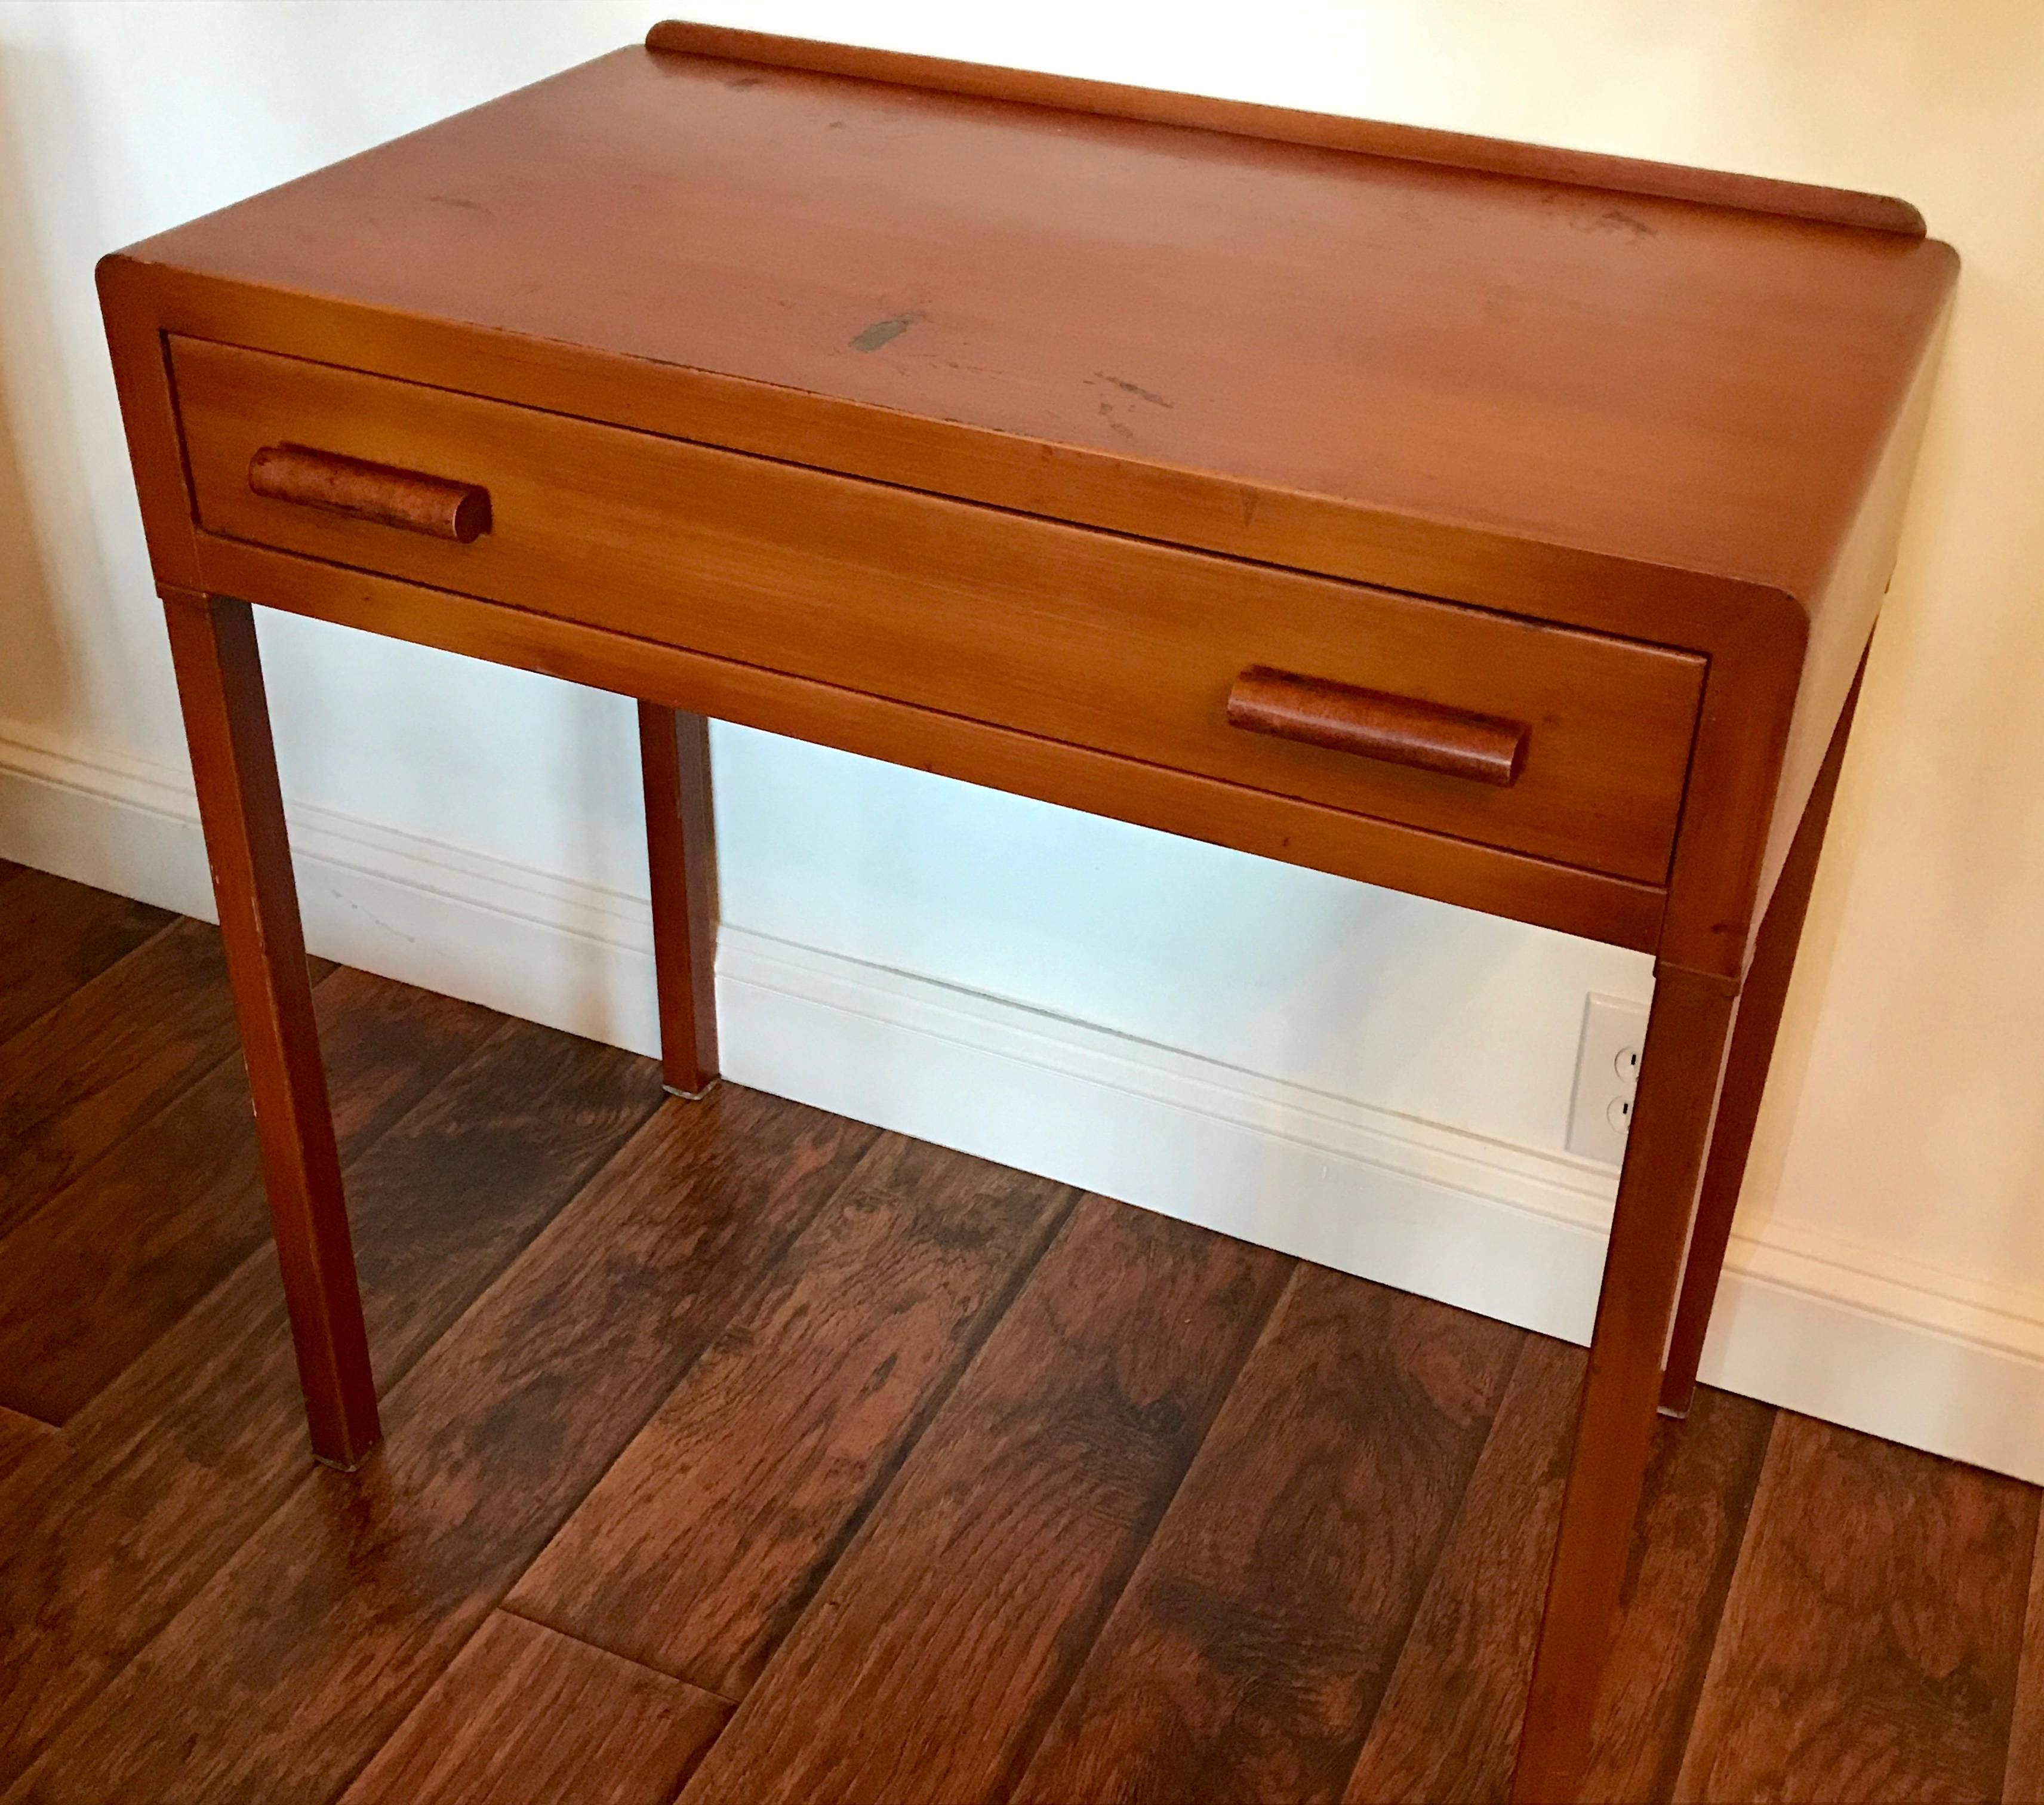 Very cool Art Deco metal desk very similar to the designs Norman Bel Geddes created for Simmons Furniture in the 1930s. All original with wear consistent with age and use. Please see photos.